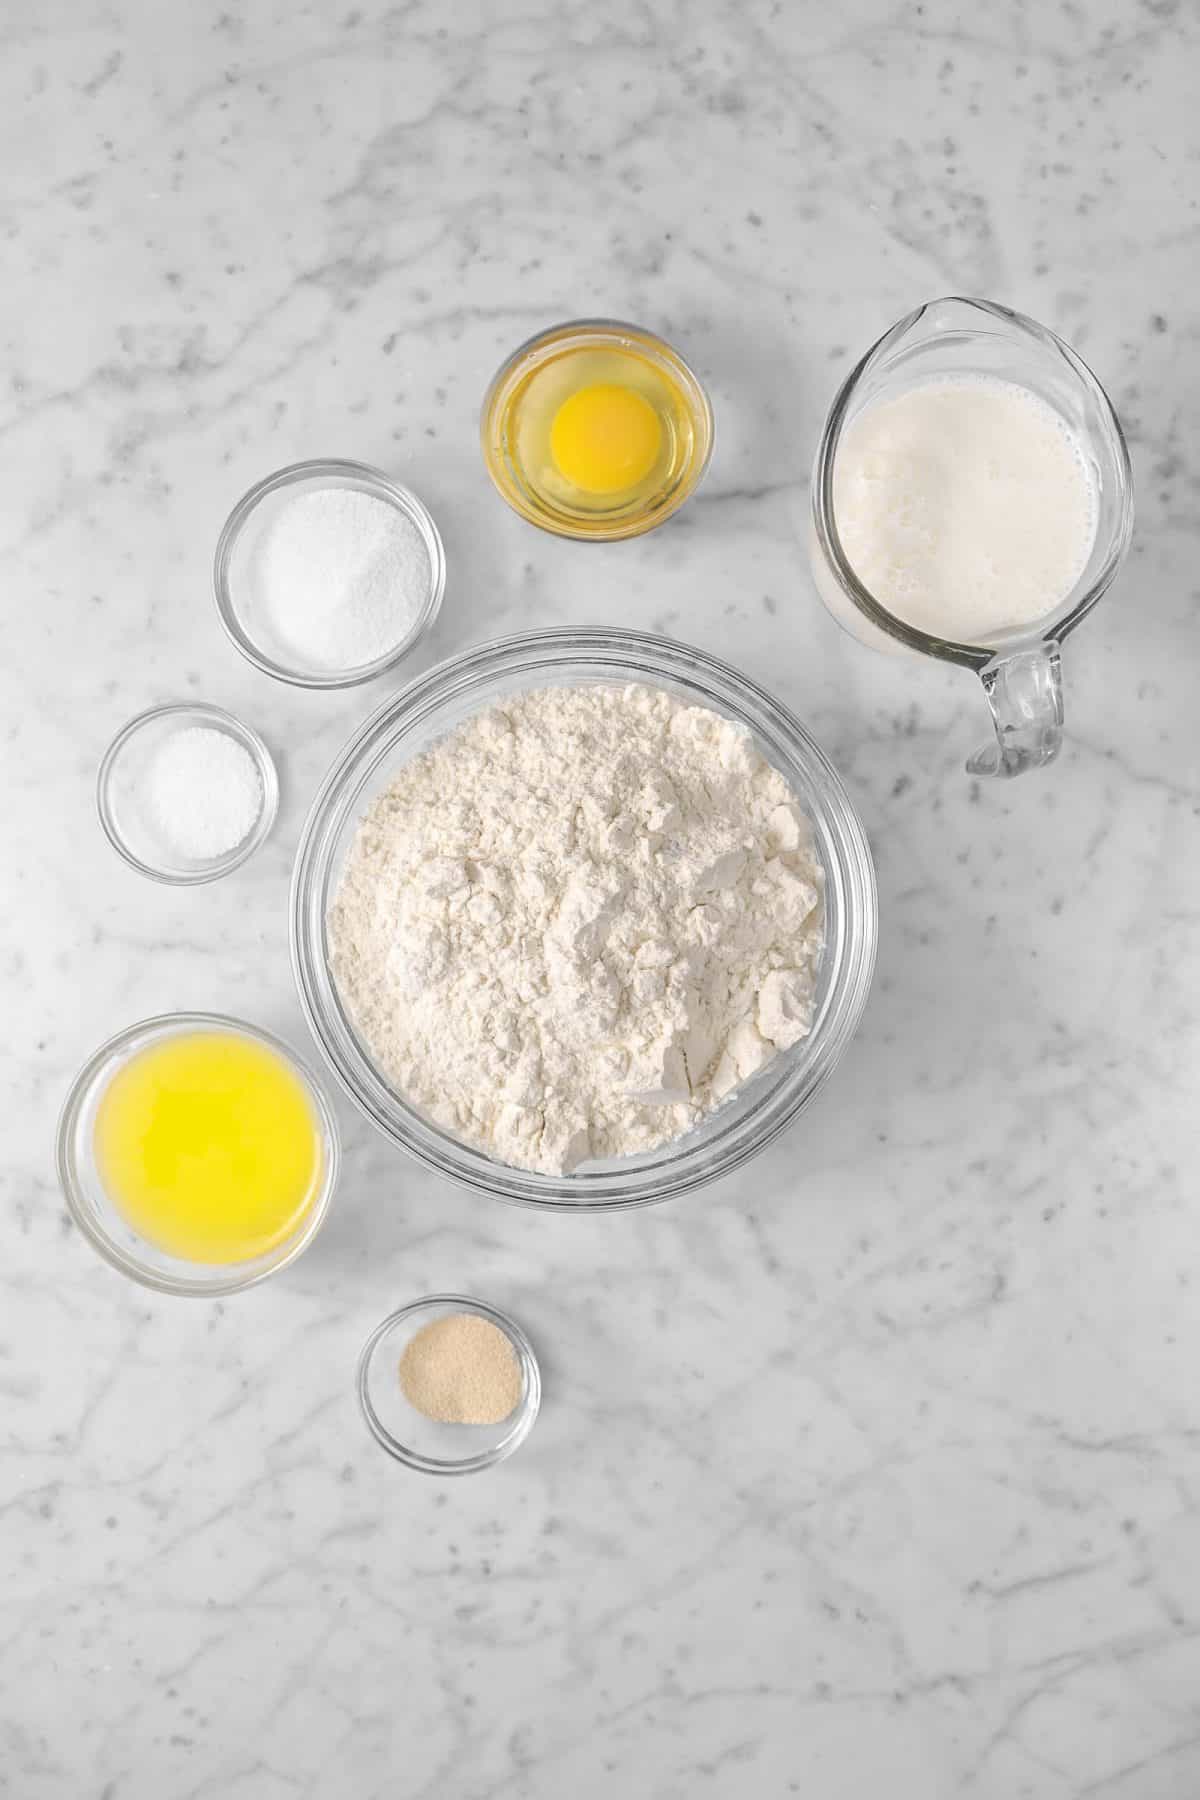 ingredients for buttermilk sandwich bread on a marble counter